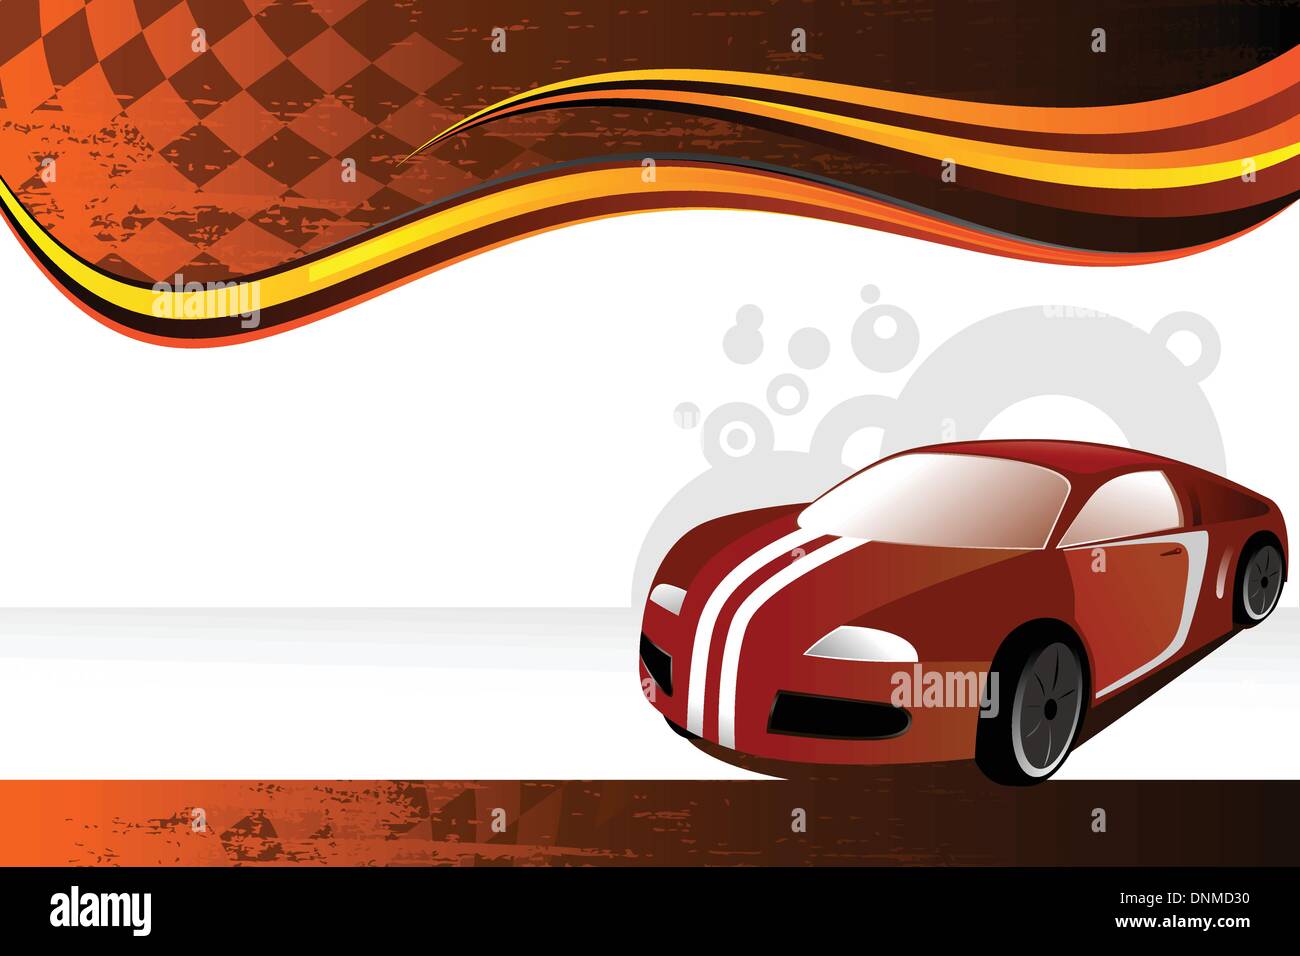 A vector illustration of an automobile or car banner Stock Vector